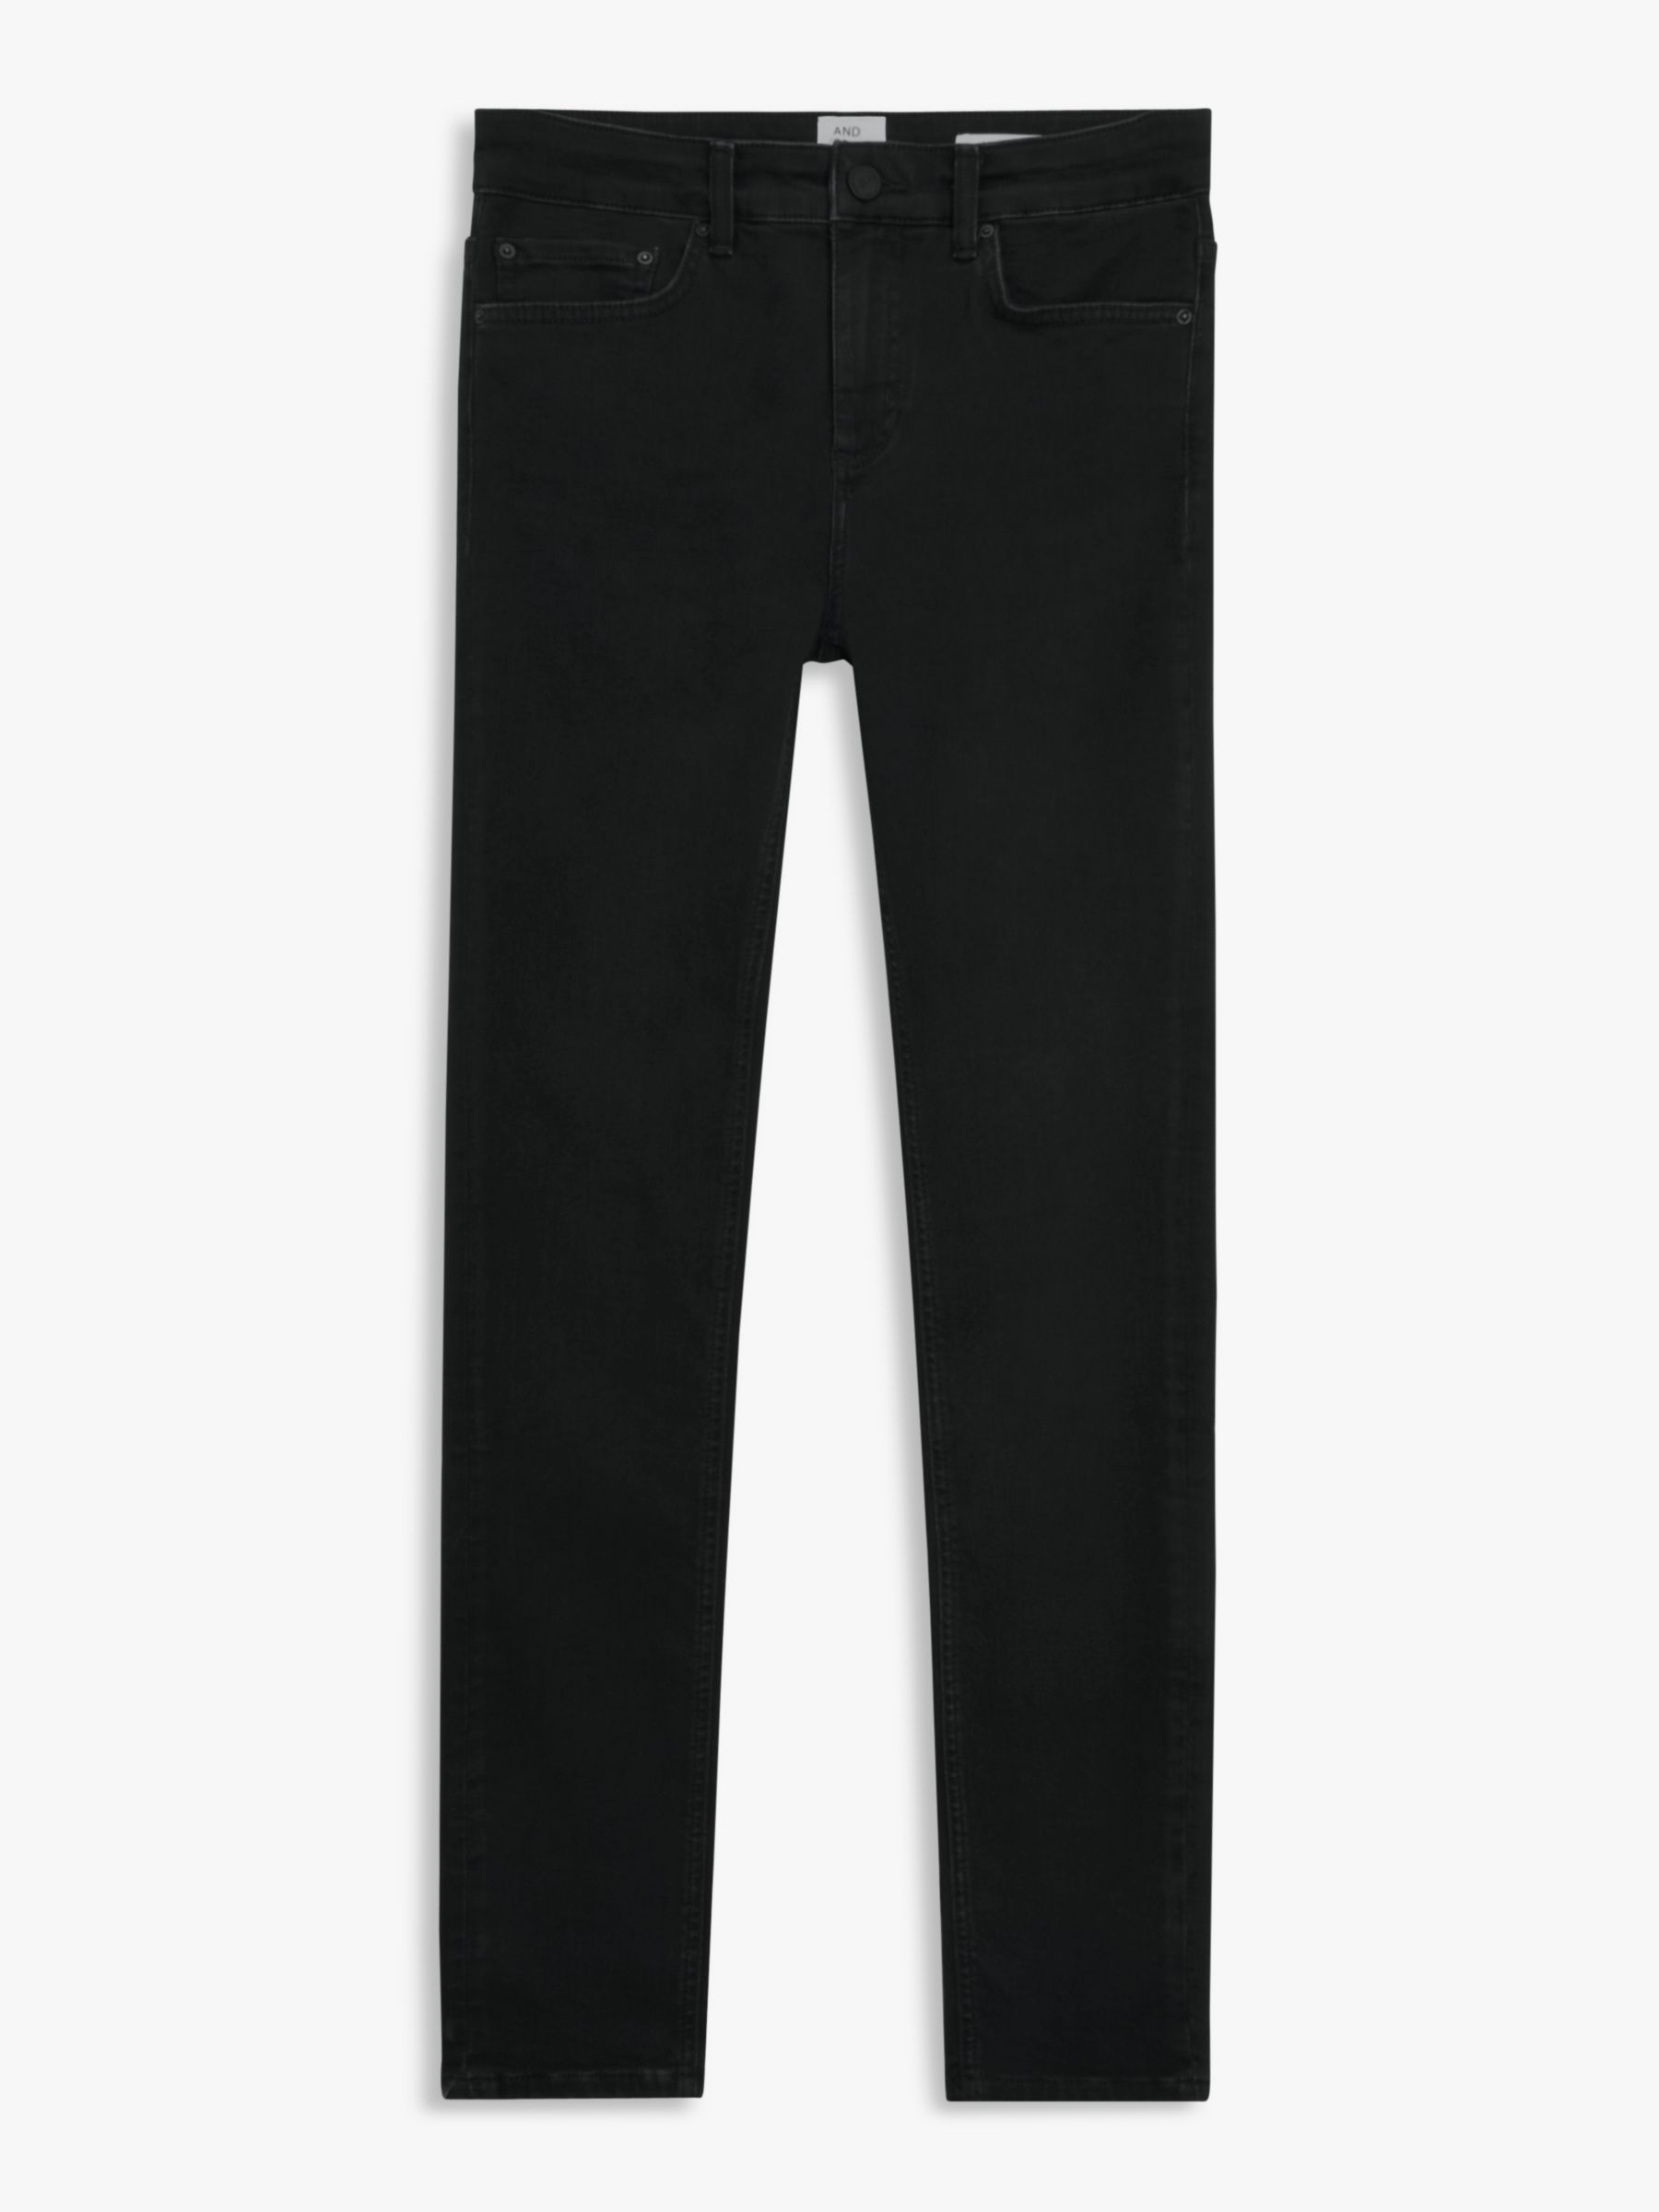 AND/OR Abbot Kinney Skinny Jeans, Washed Black, 34